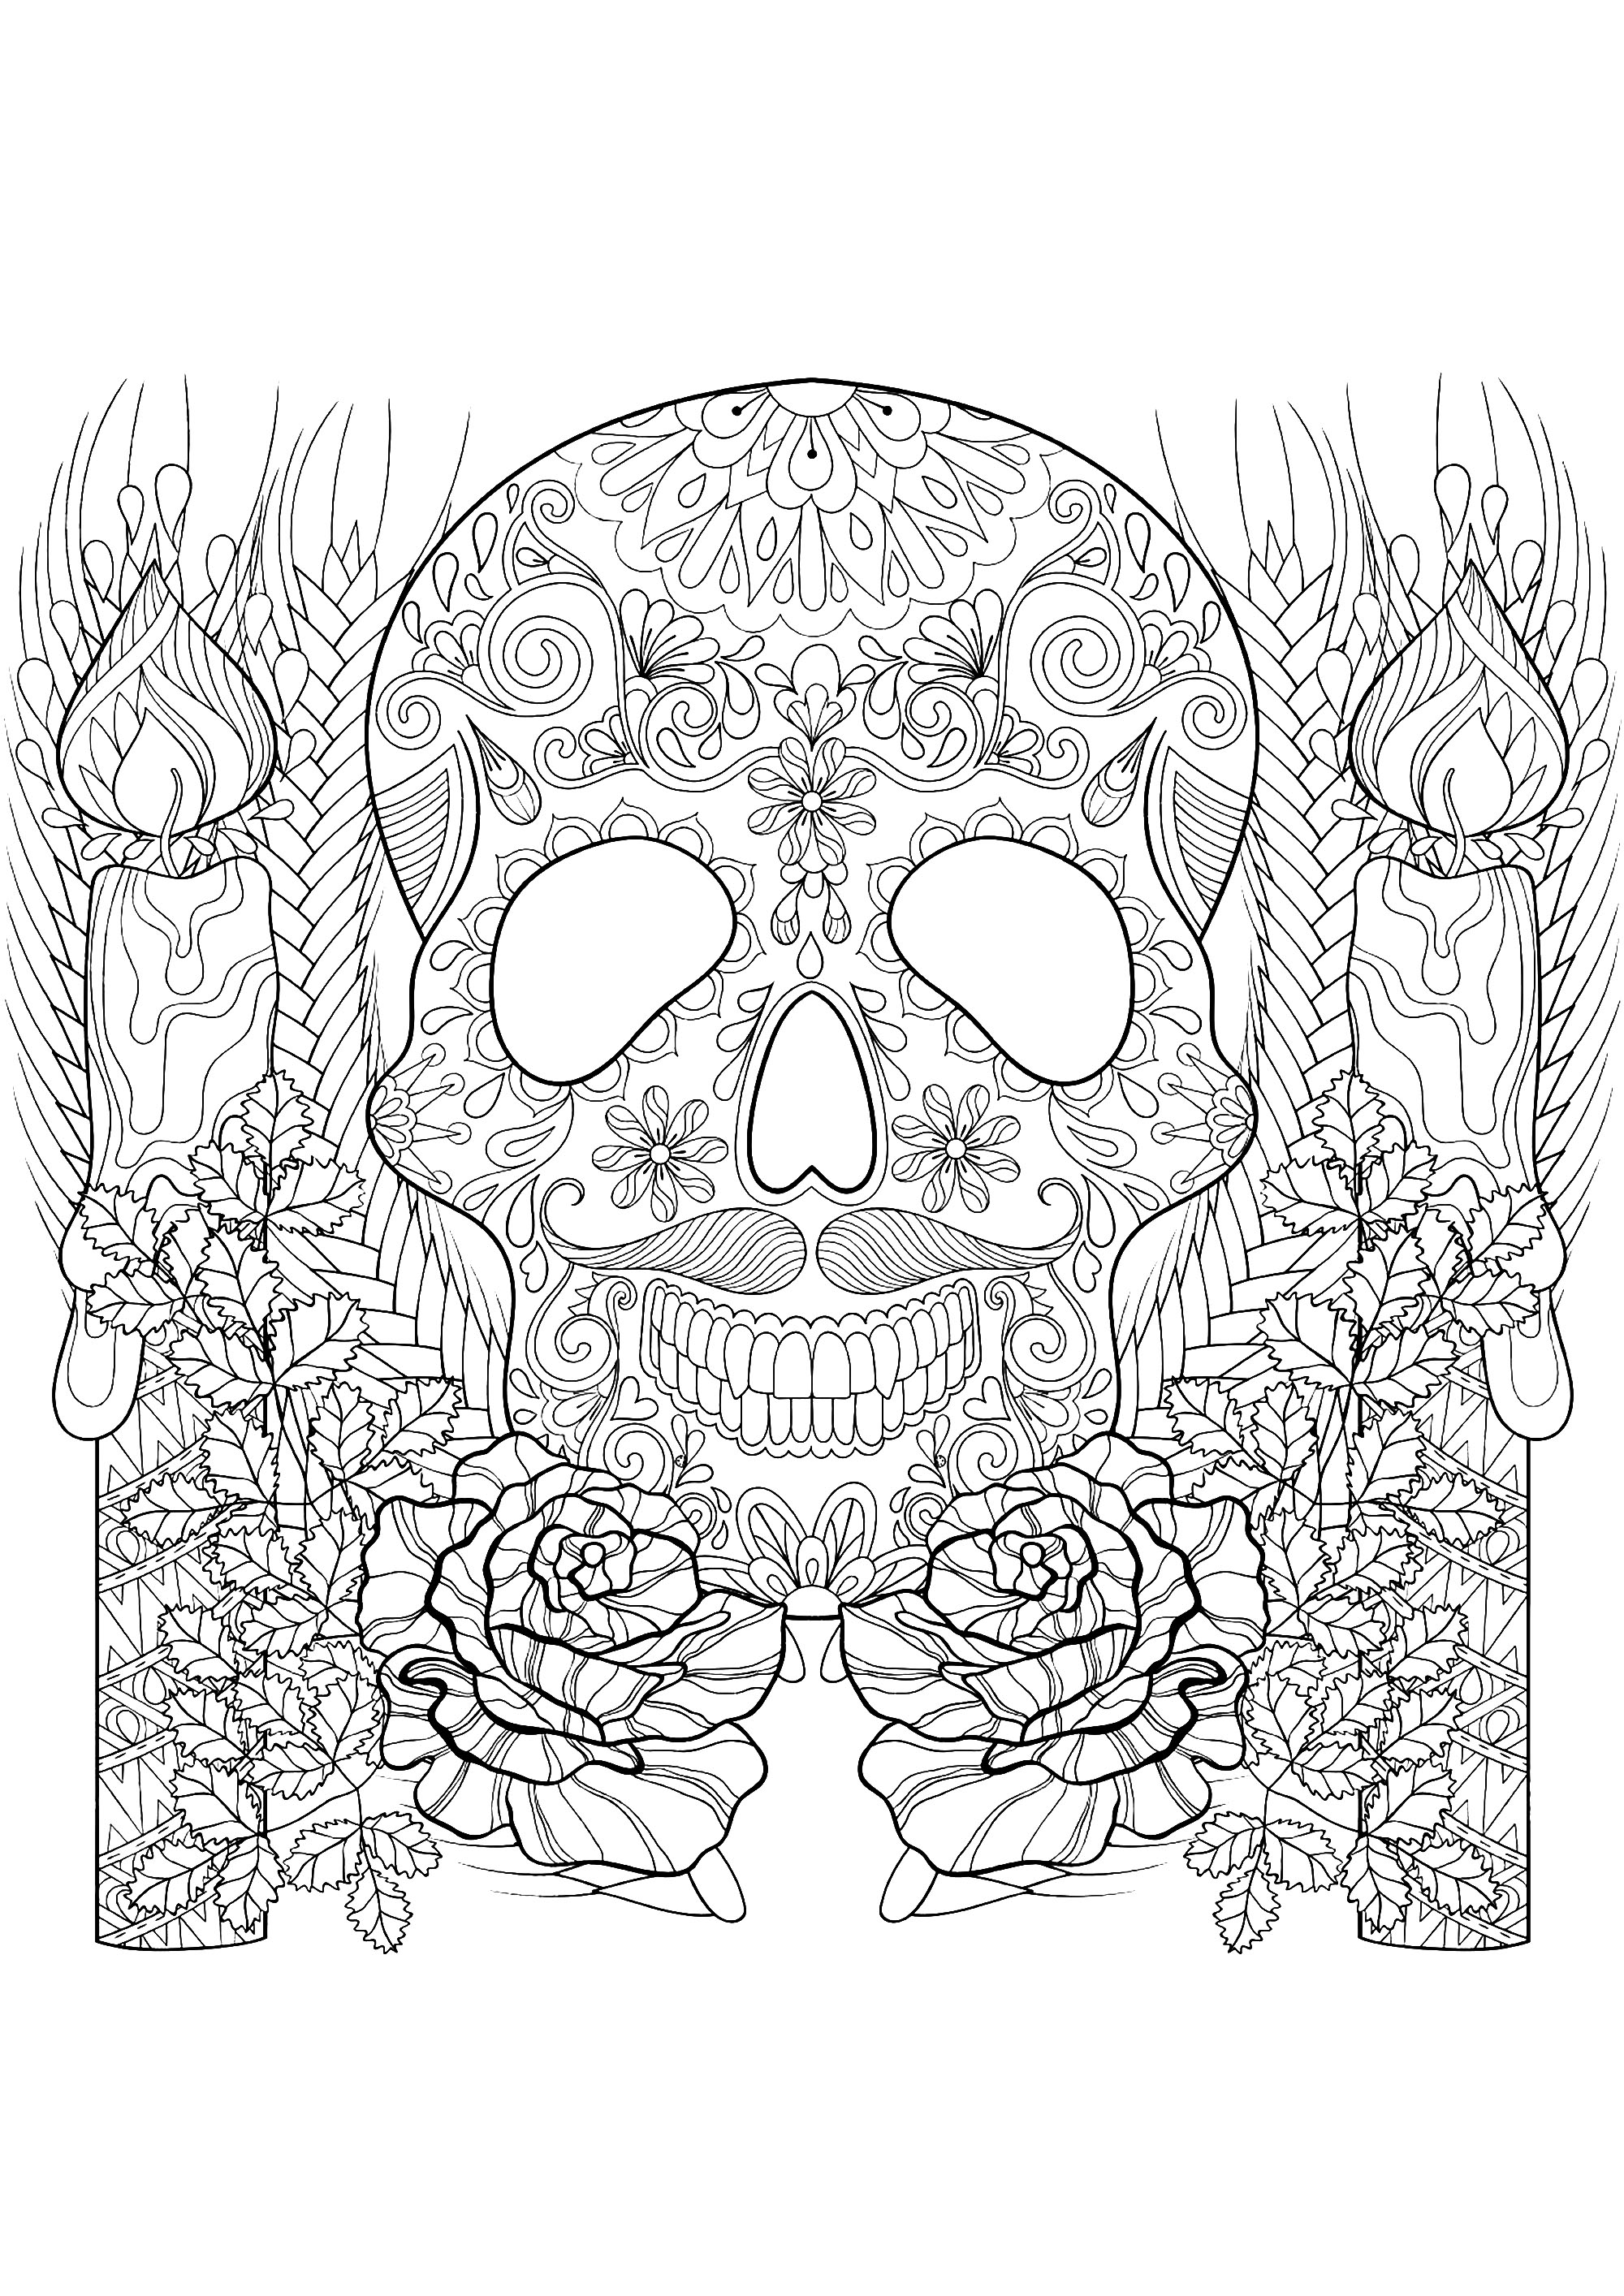 A beautiful Halloween coloring page consisting of a decorated skull surrounded by candles and flowers, Source : 123rf   Artist : Ipanki